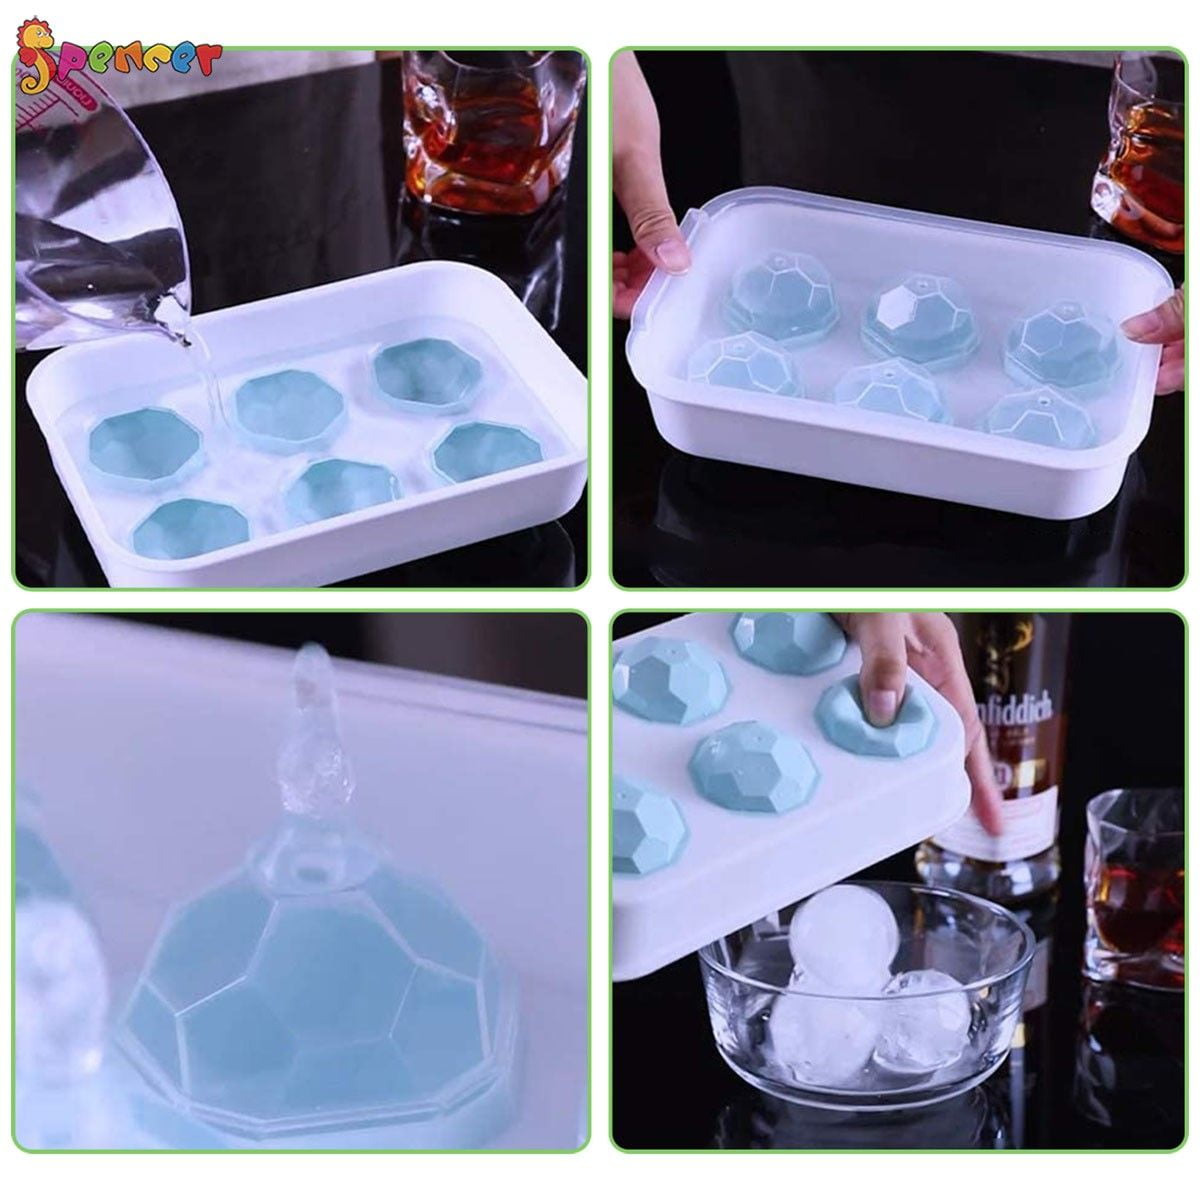 Spencer Silicone Small 1.5 Inch Ice Cube Trays with Lids for Freezer,  Reusable 9 Cavity Ice Cube Mold for Cocktails, Whiskey, Candy and More